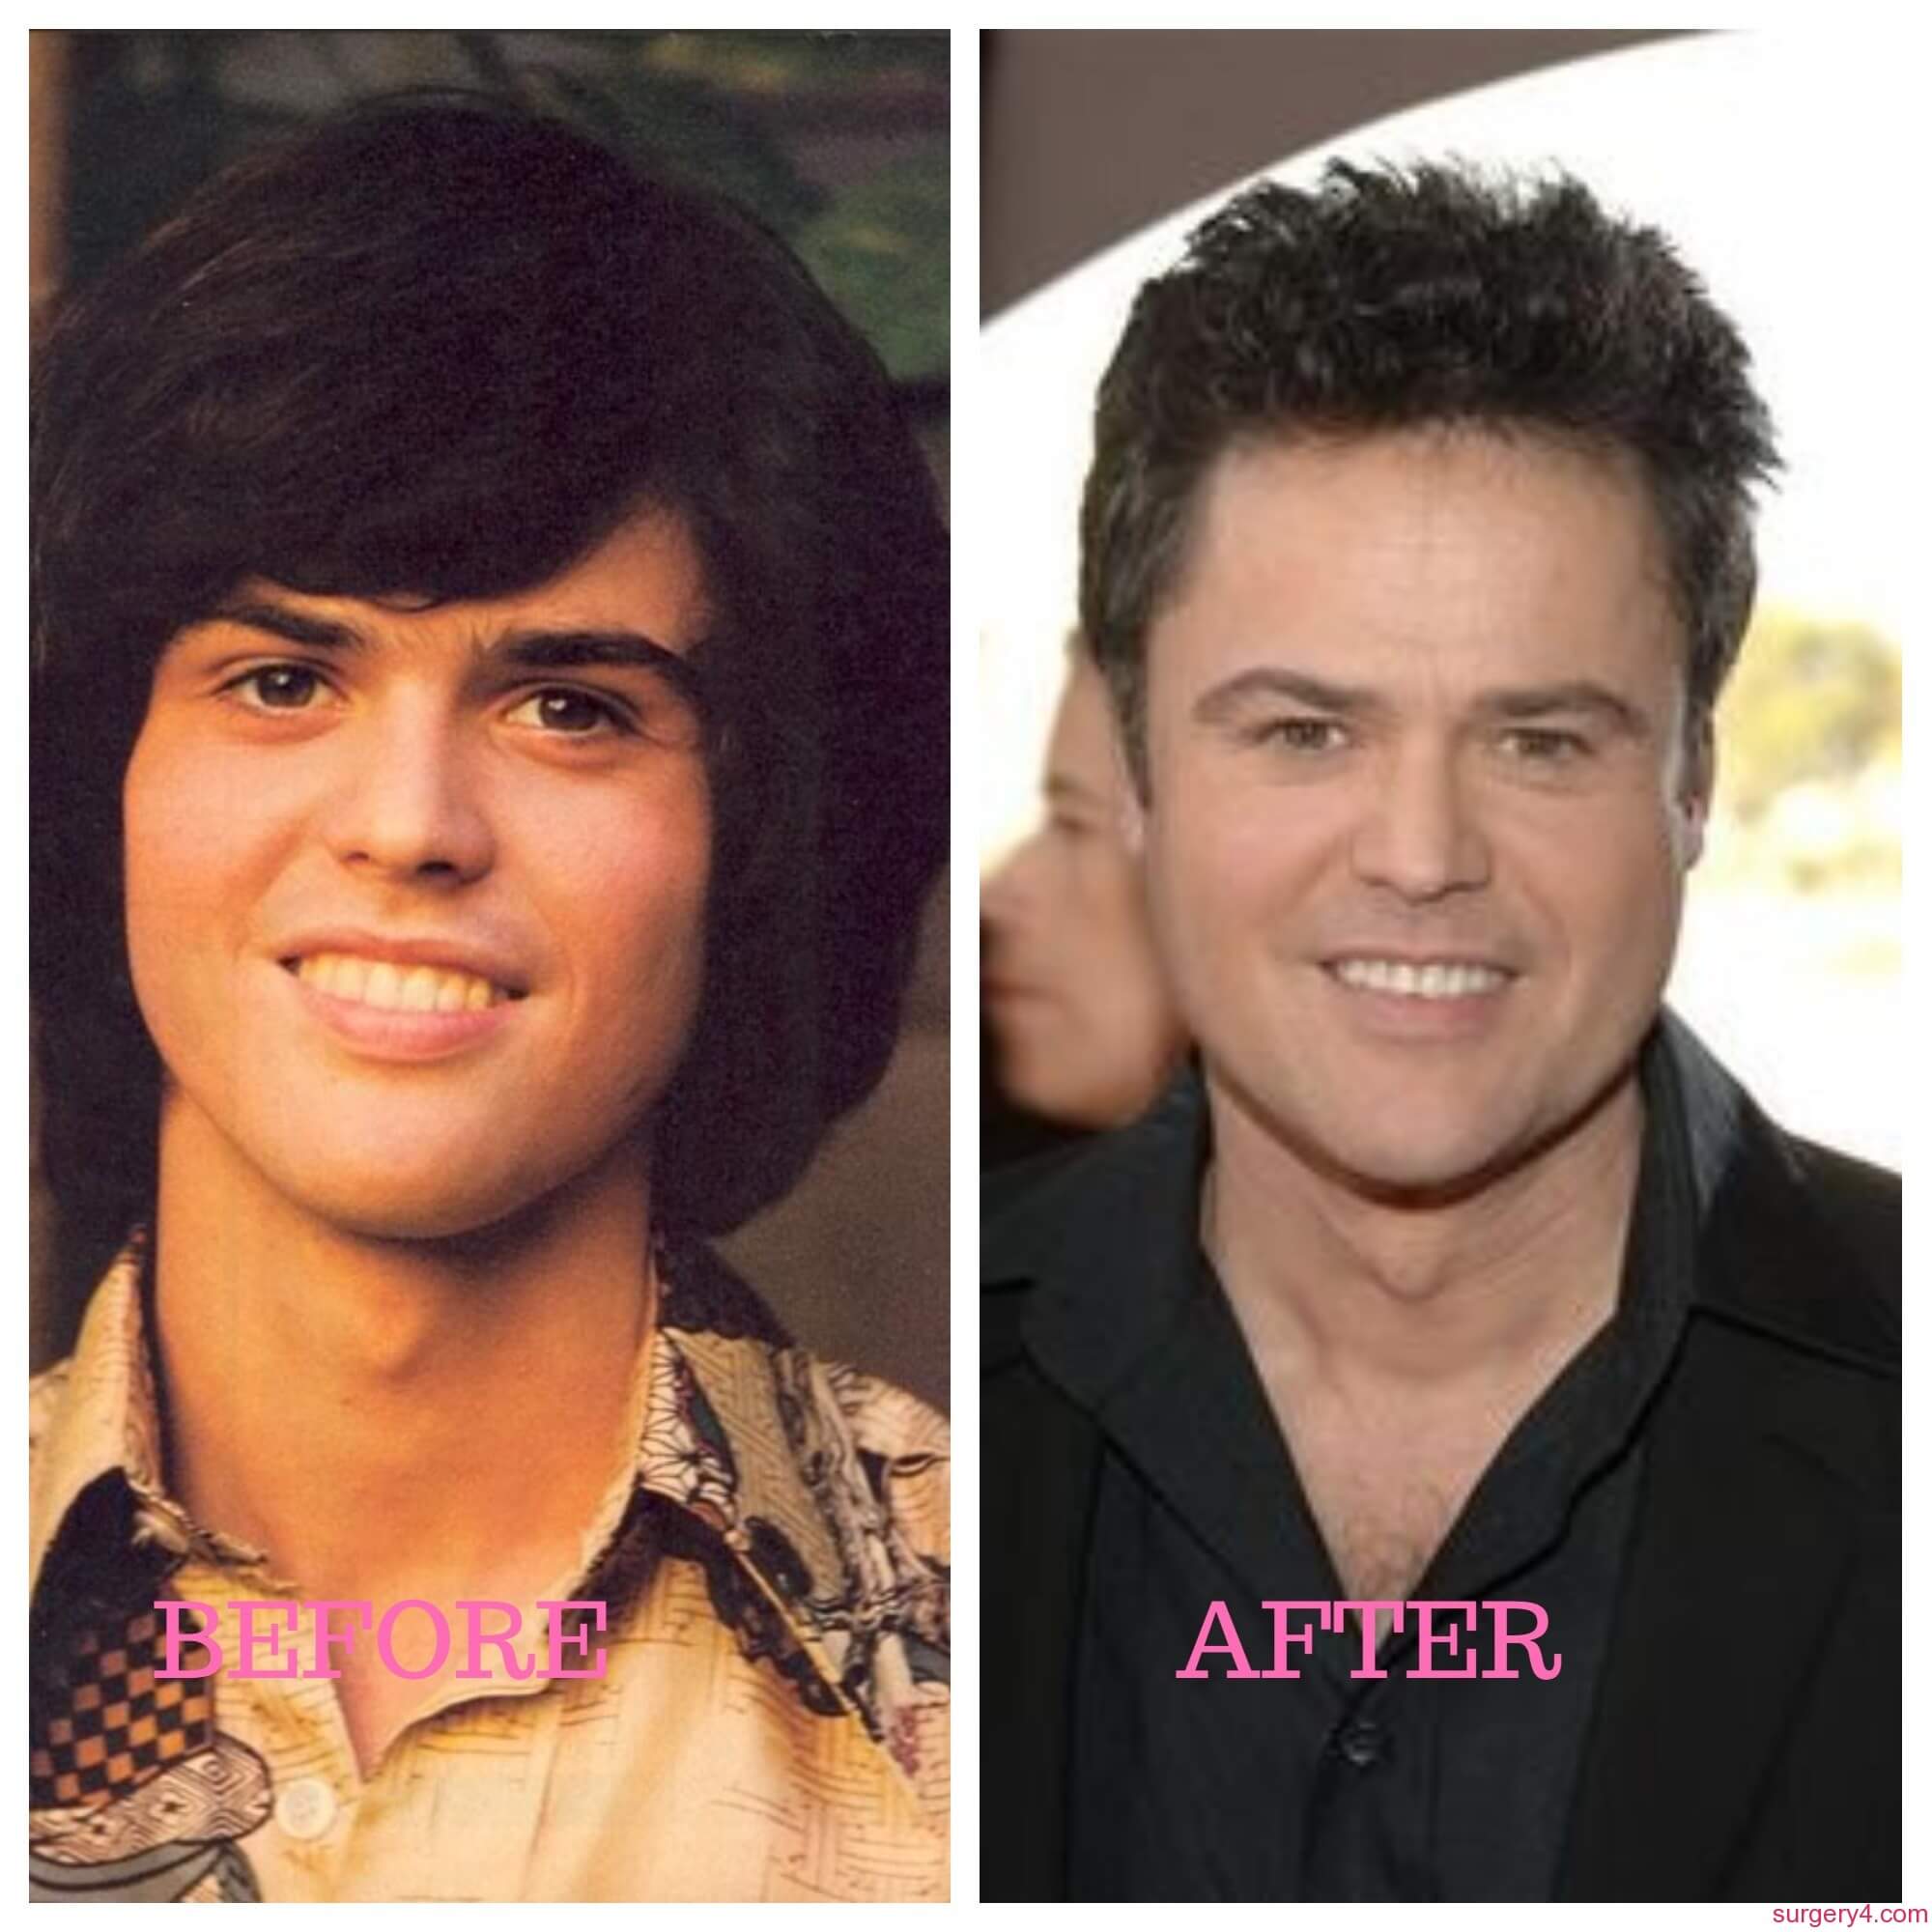 Donny Osmond Plastic Surgery Photos [Before & After] ⋆ Surgery4